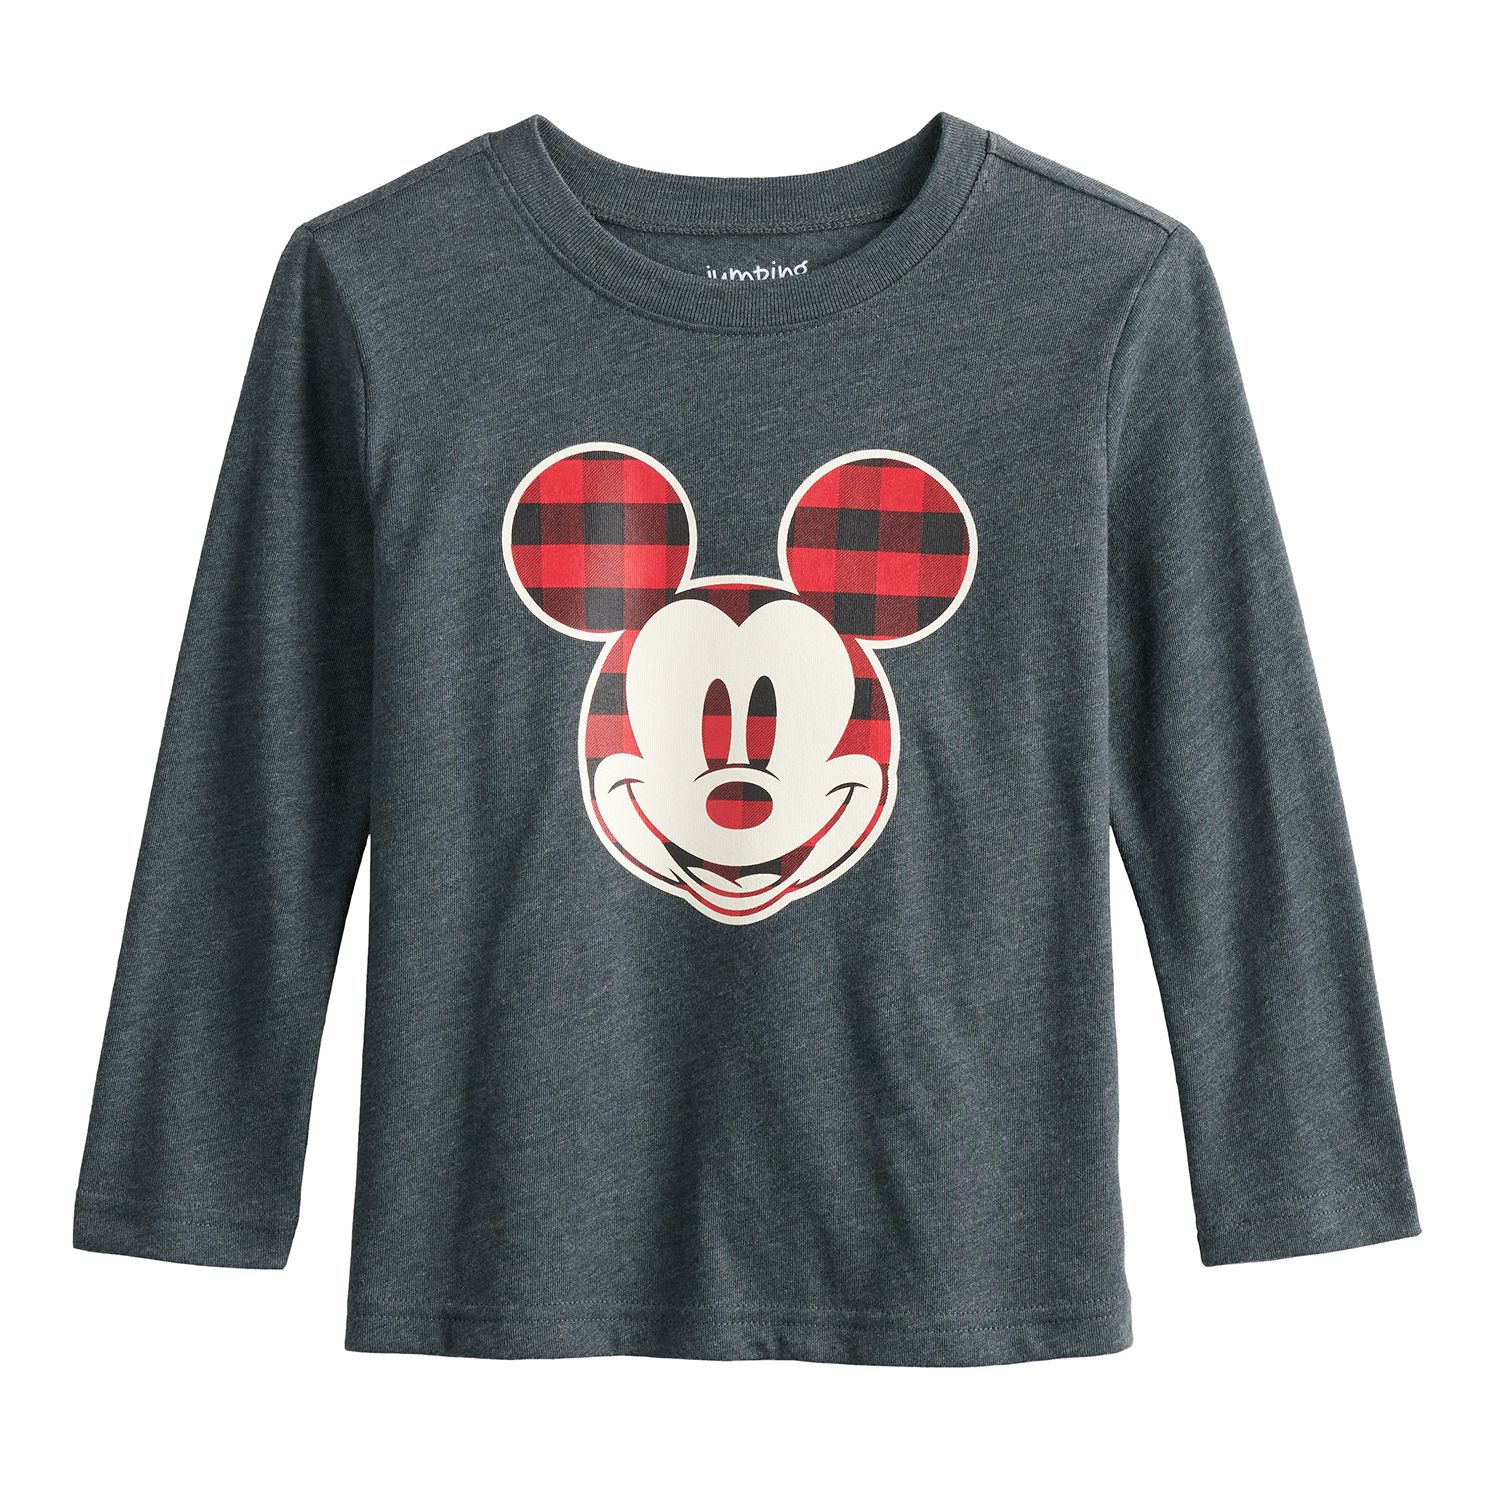 Image for Disney/Jumping Beans Disney's Mickey Mouse Toddler Boy Plaid Mickey Graphic Tee by Jumping Beans® at Kohl's.